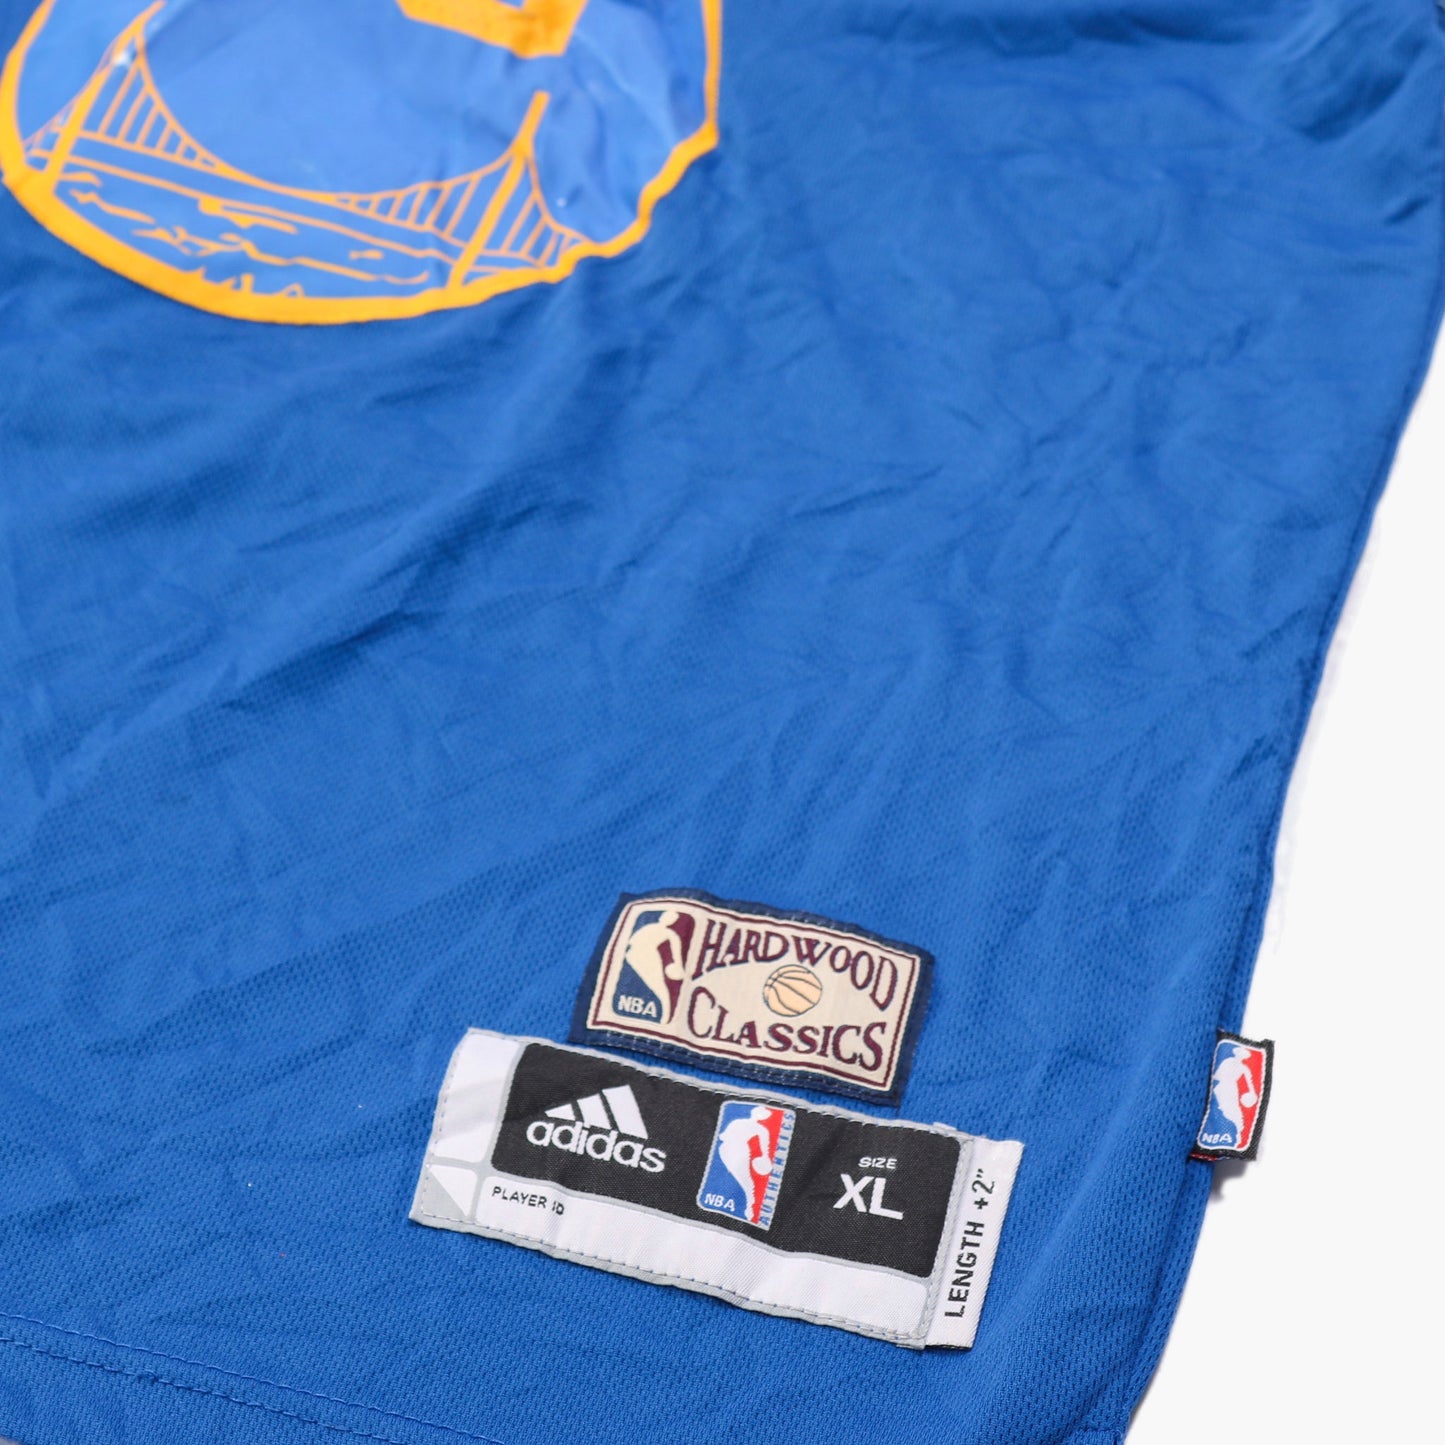 Vintage Golden State Warriors NBA Jersey 'Curry' - American Madness